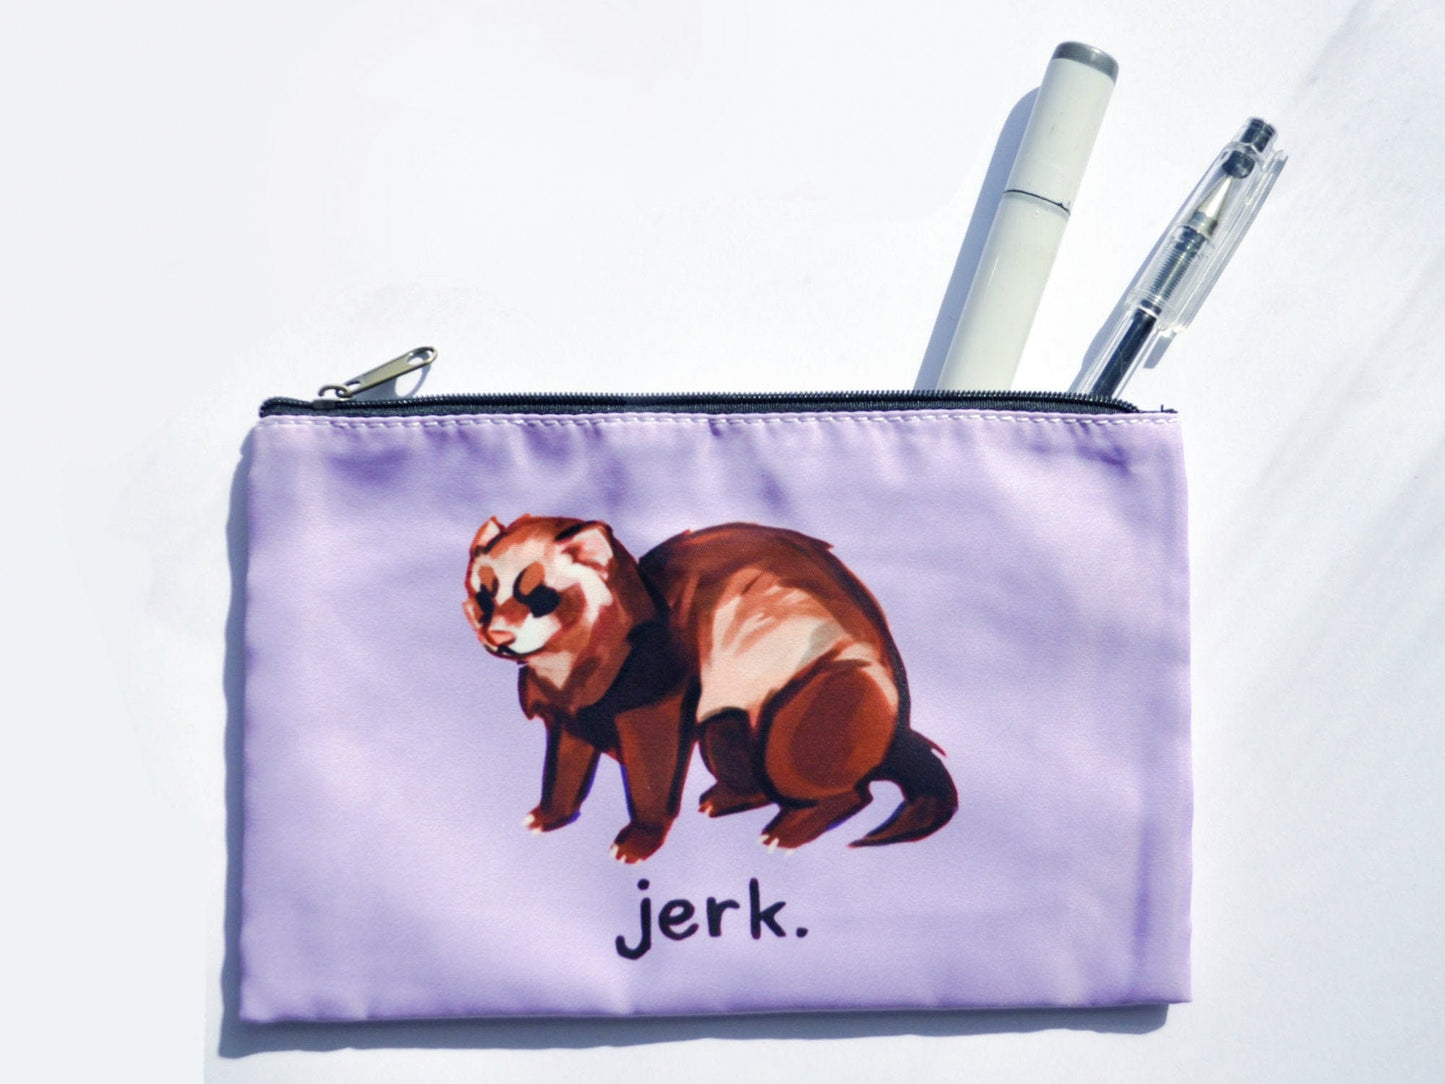 Rude Ferret Pencil Case - Zipper Bag for Cosmetics or Stationery